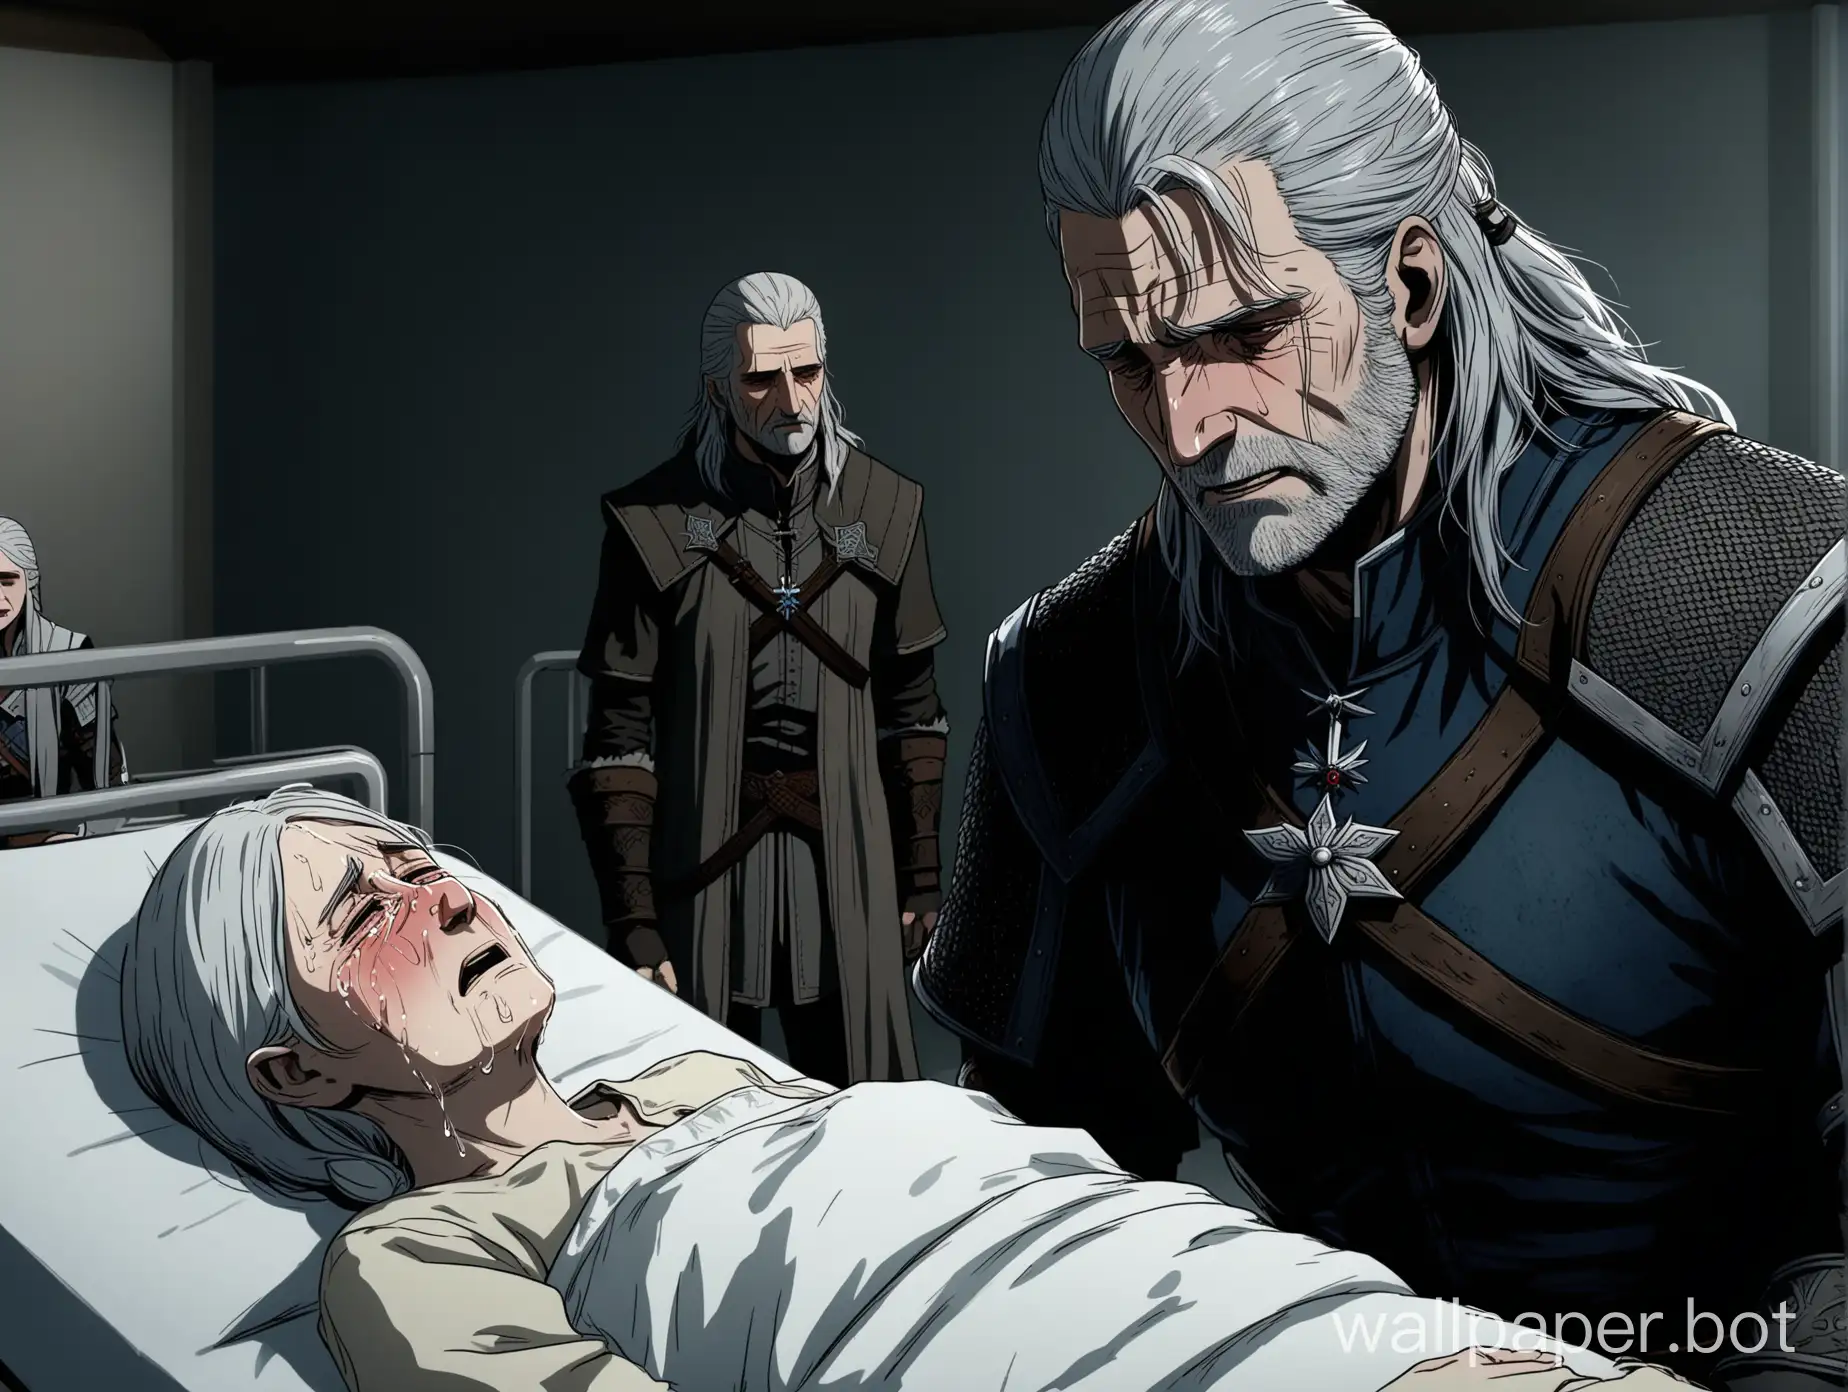 Geralt lies on a hospital bed, geralt grandfather, old, sad face, sad, crying; cries nearby stands daughter, crying, and relatives cry, crying